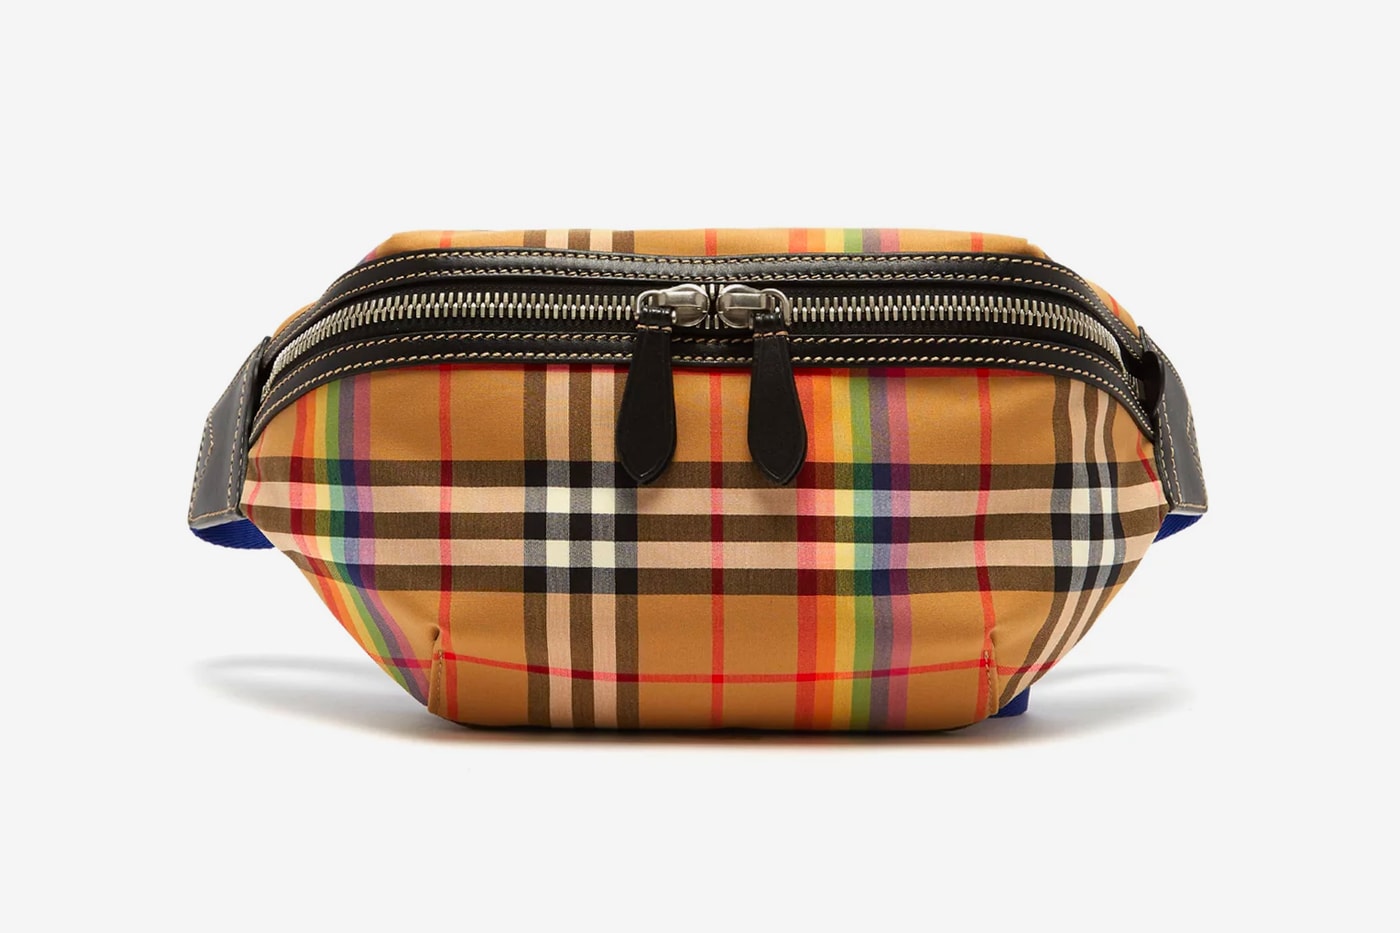 Burberry Vintage Check Cross-Body Bag fall winter 2018 release info accessories